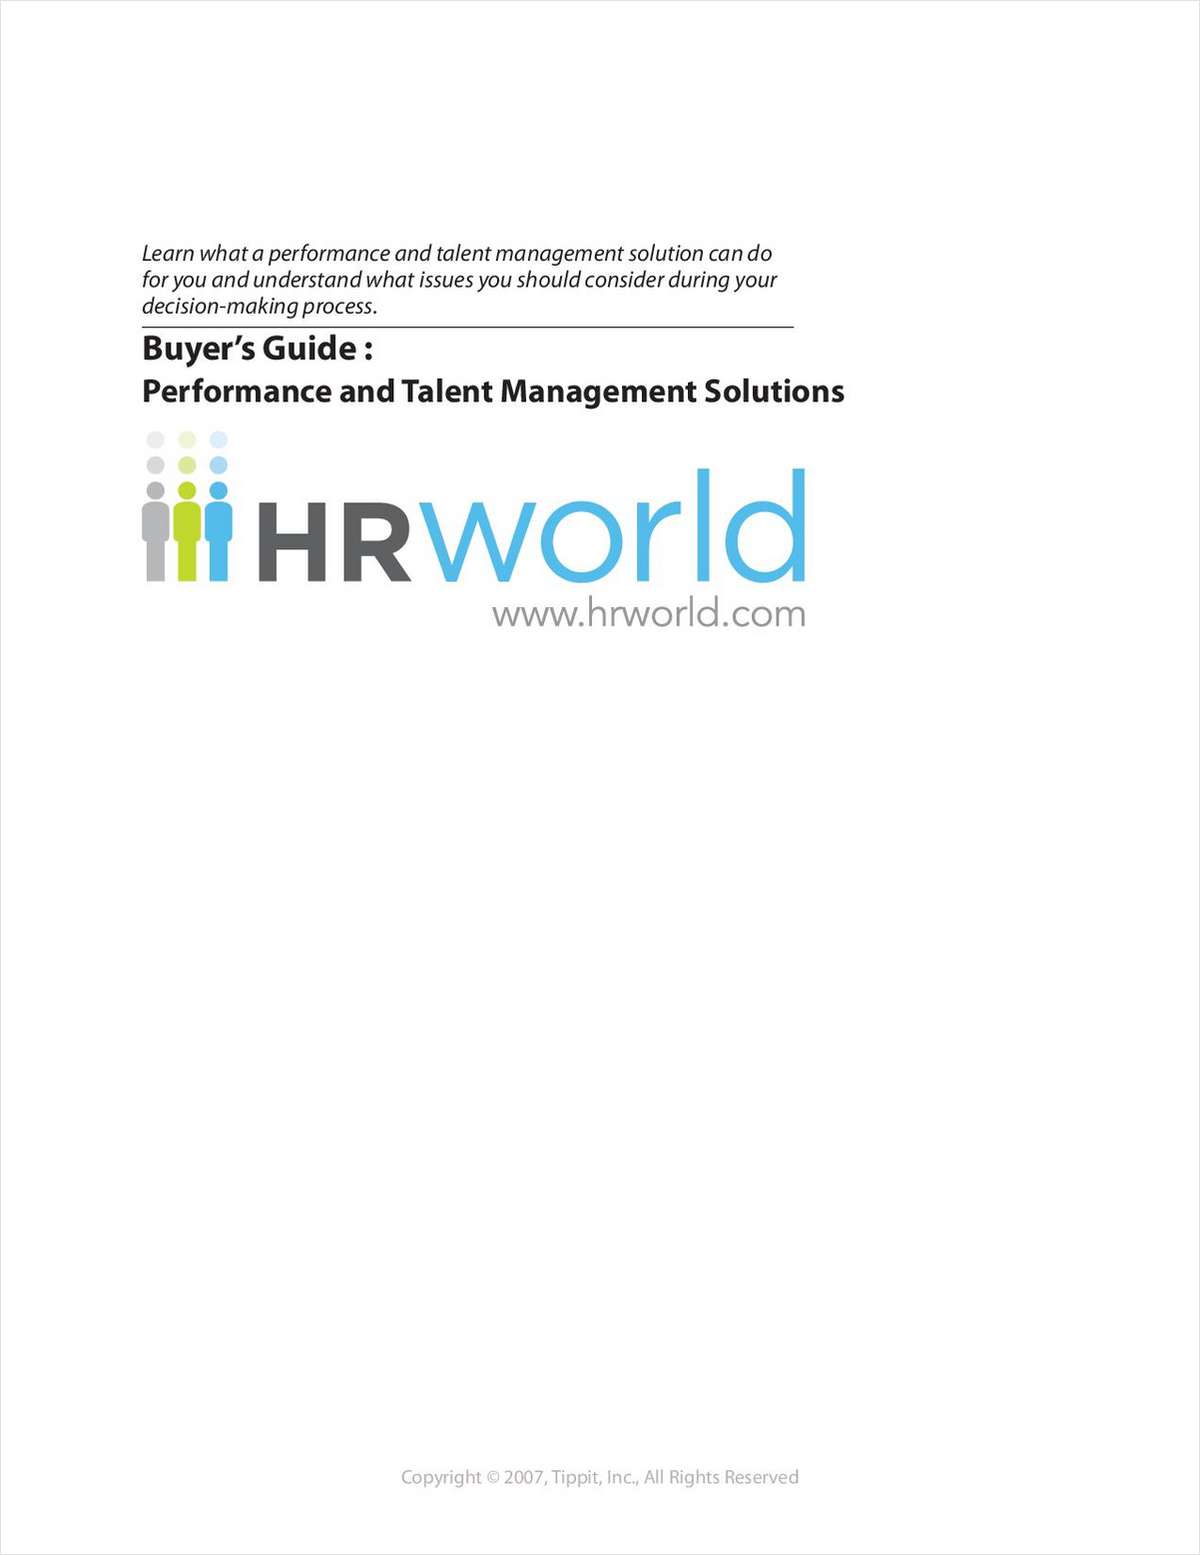 Performance and Talent Management Solutions Buyer's Guide